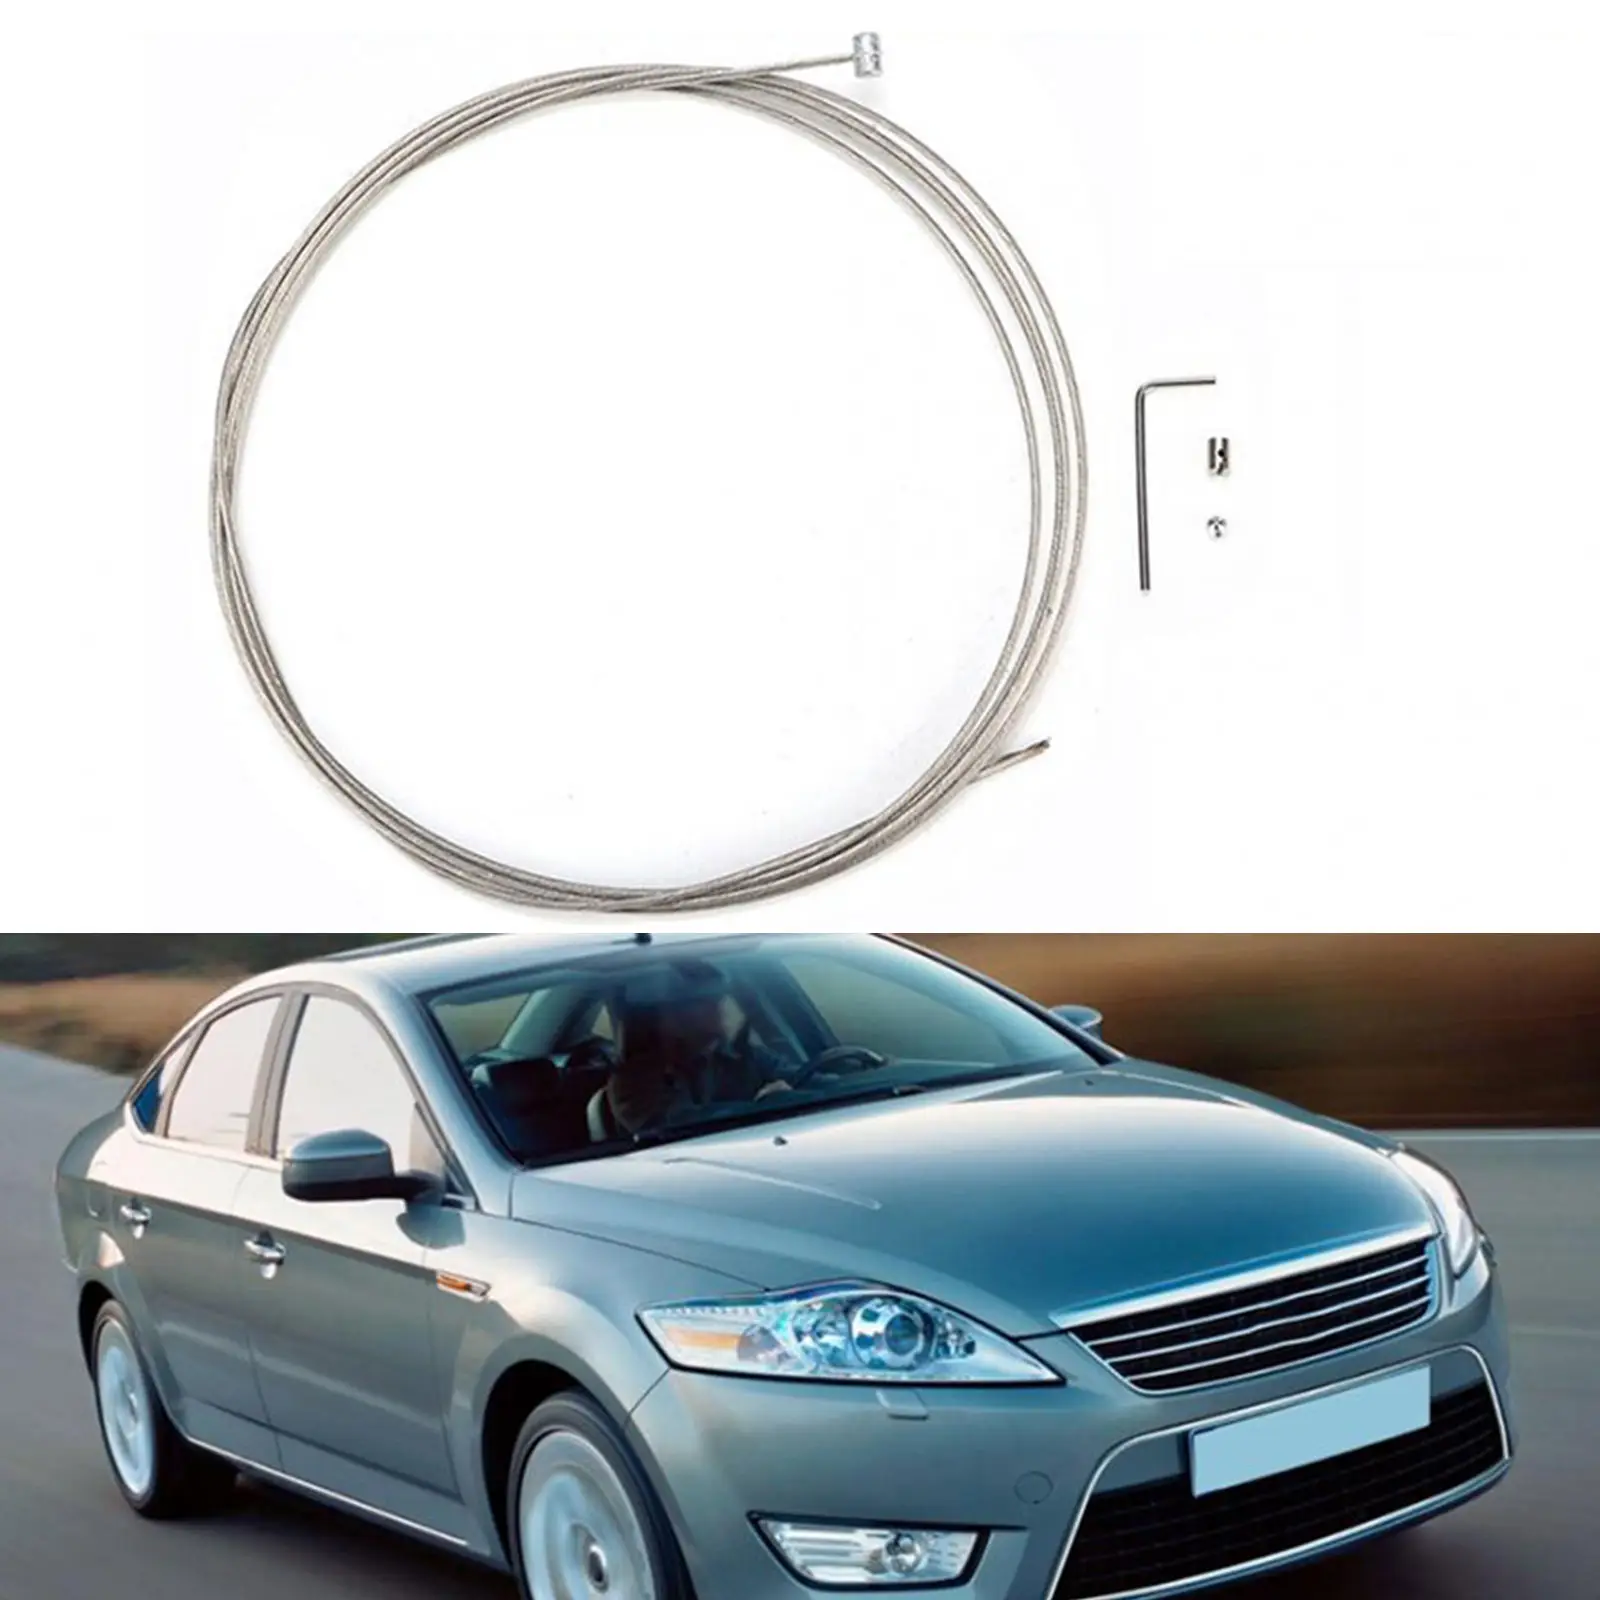 8.2ft Car Handbrake Replacement Broken Snapped Bonnet Release Cable Fix Repair Kit fits for Ford Mondeo MK4 2007-2021